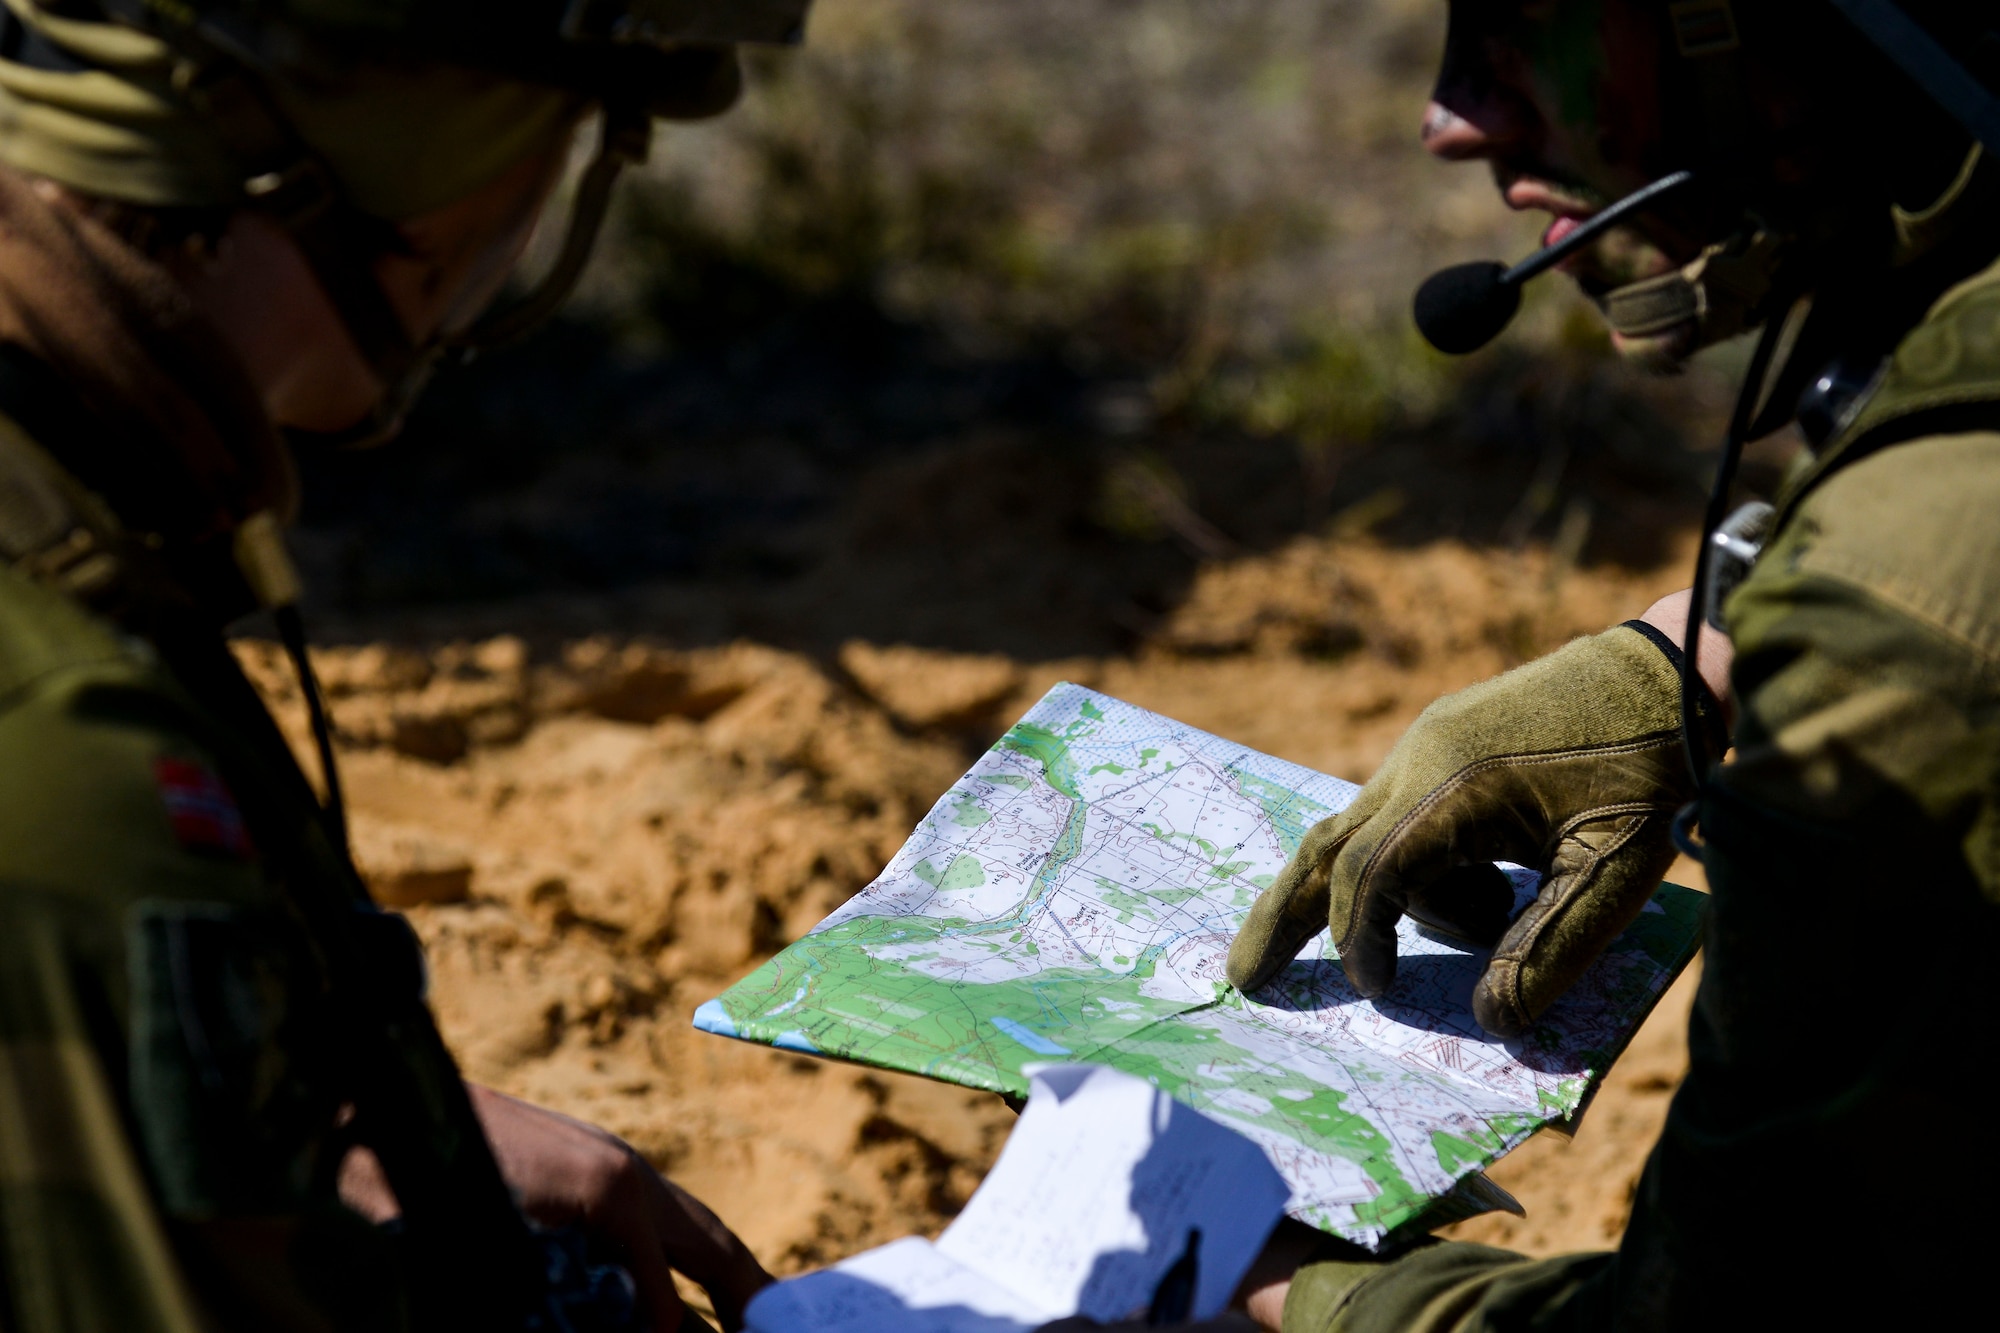 British soldiers review a map before a training exercise June 13, 2016, at Adazi Military Training Base, Latvia.  U.S. forces and NATO partners are in Europe participating in Saber Strike 16; a long-standing, U.S. Joint Chiefs of Staff-directed, U.S. Army Europe-led cooperative-training exercise, which has been conducted annually since 2010.  Our presence in Europe and the relationships built over the past 70 years provide the U.S. strategic access critical to meet our NATO commitment to respond to threats against our allies and partners. (U.S. Air Force photo/Senior Airman Nicole Keim)